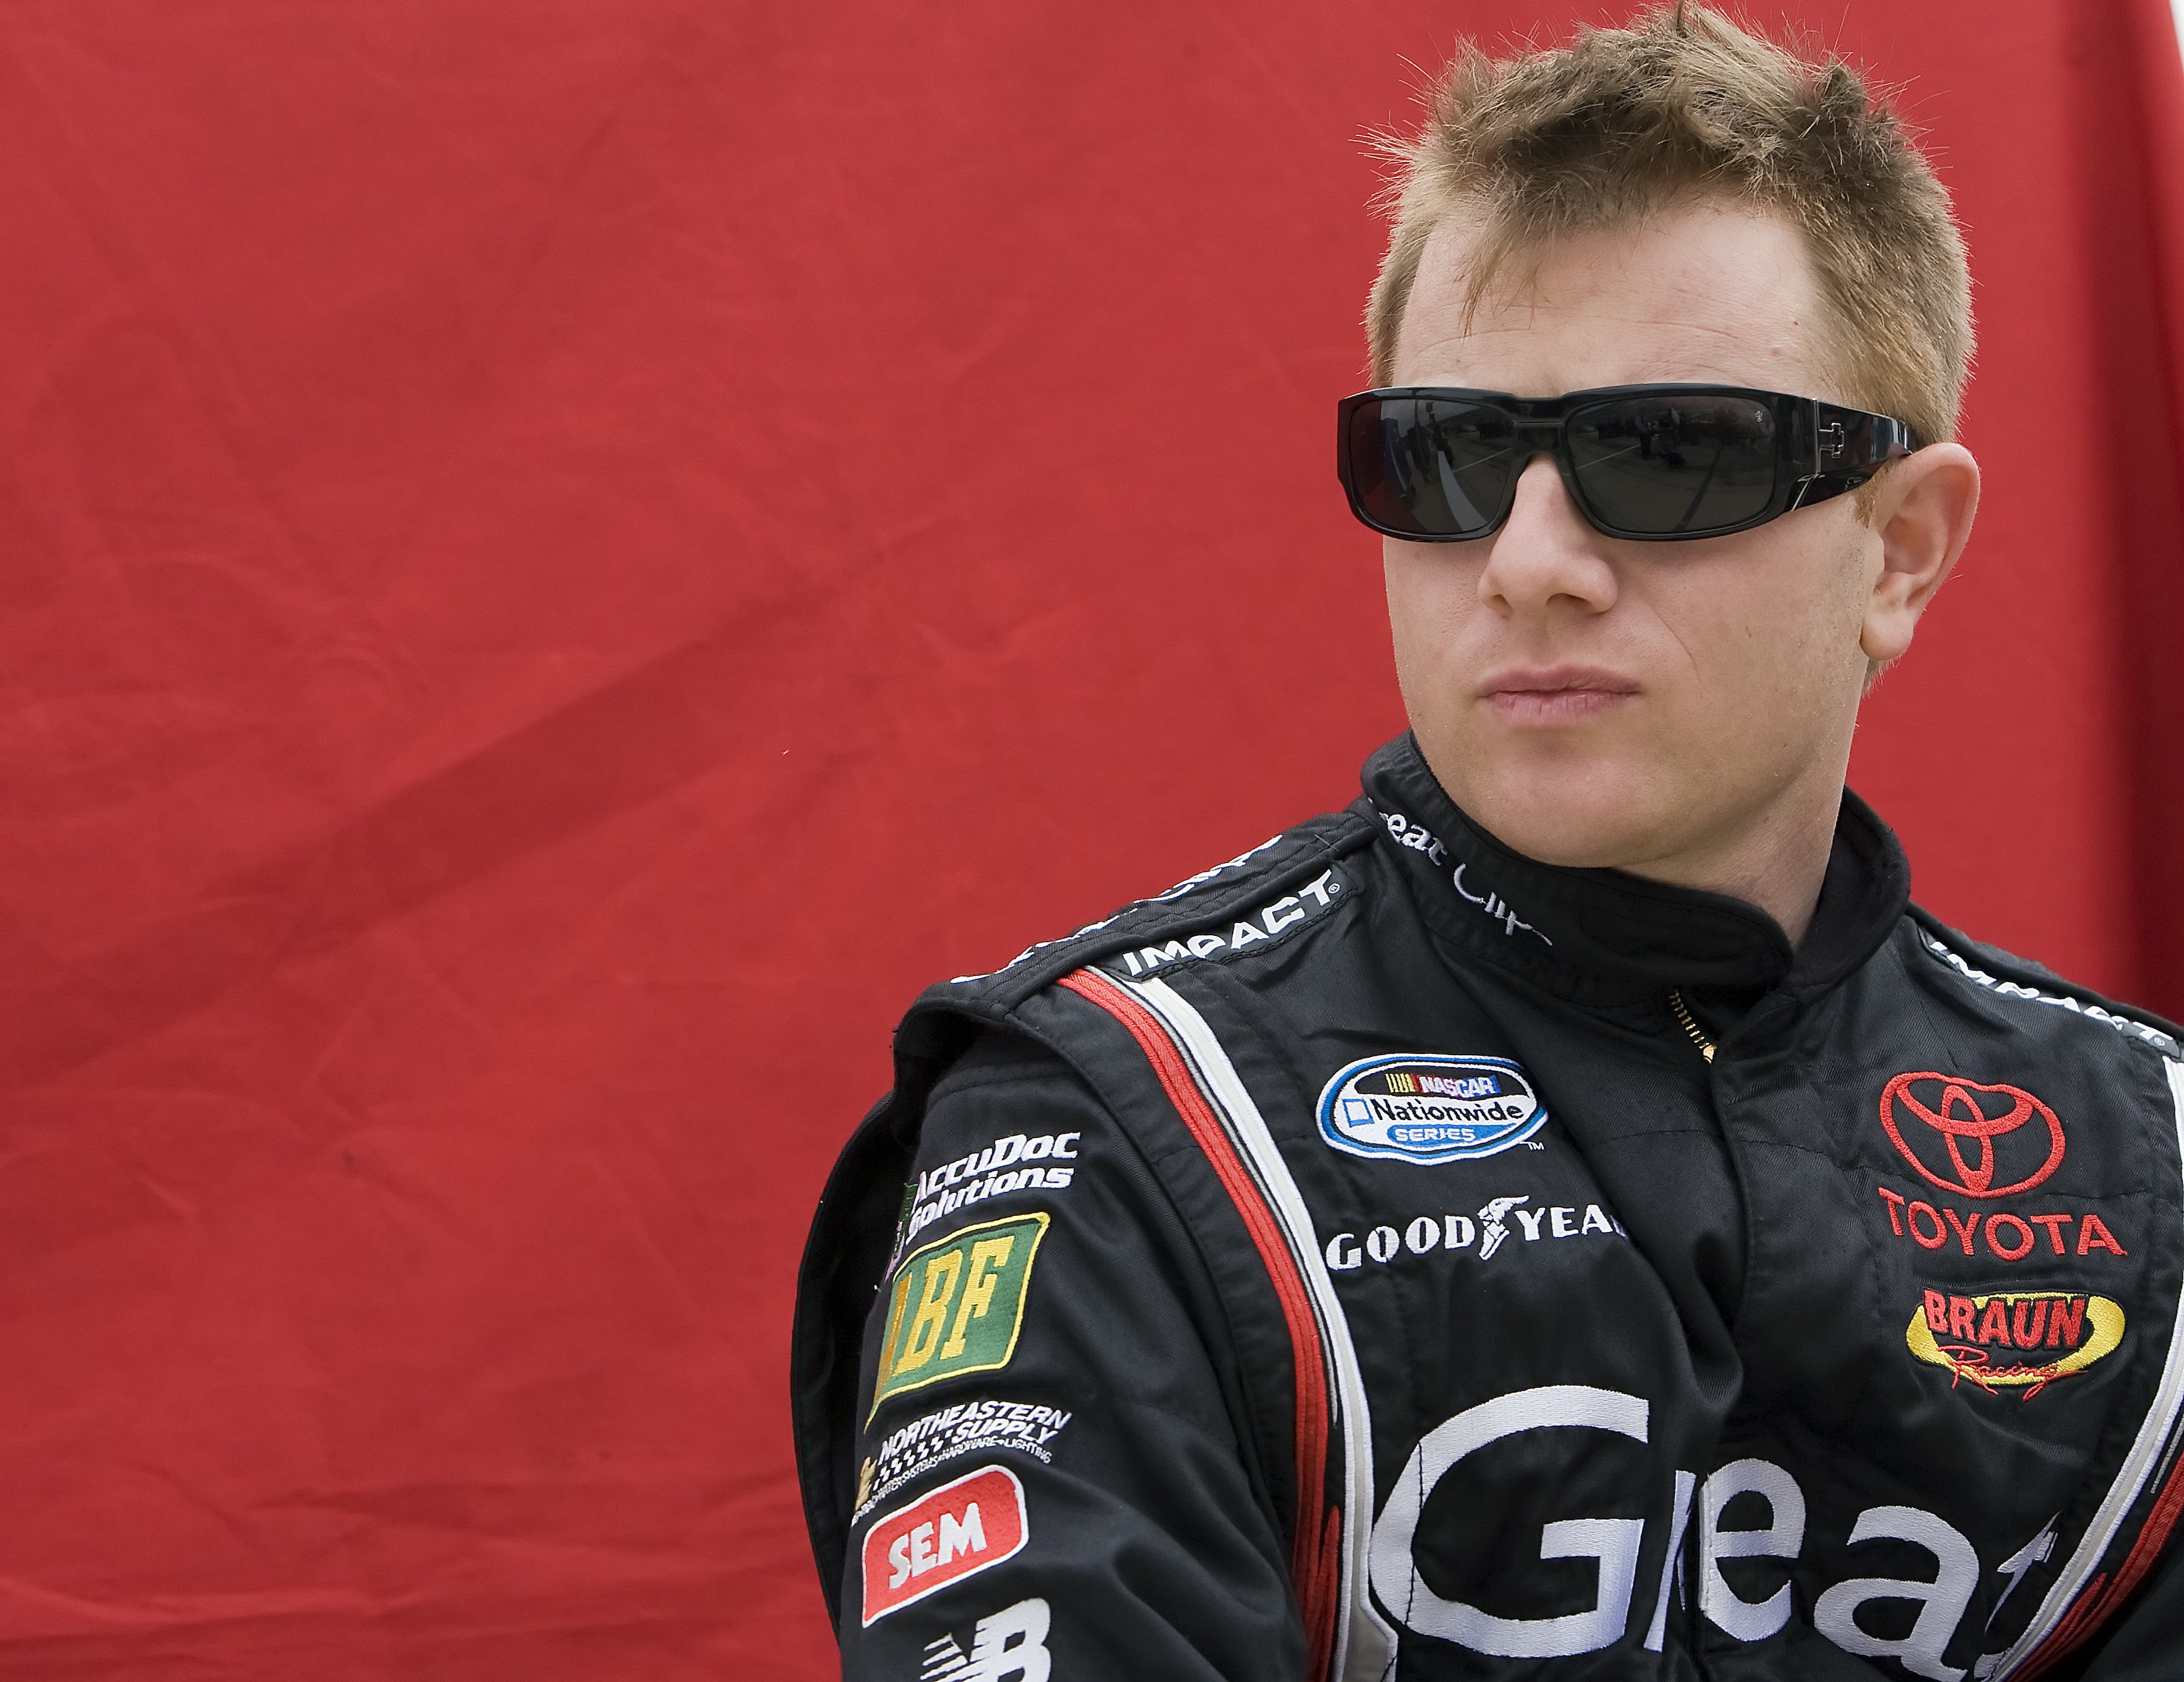 Jason Leffler at the Texas Motor Speedway on April 16, 2010 in Fort Worth, Texas | Photo: Shutterstock